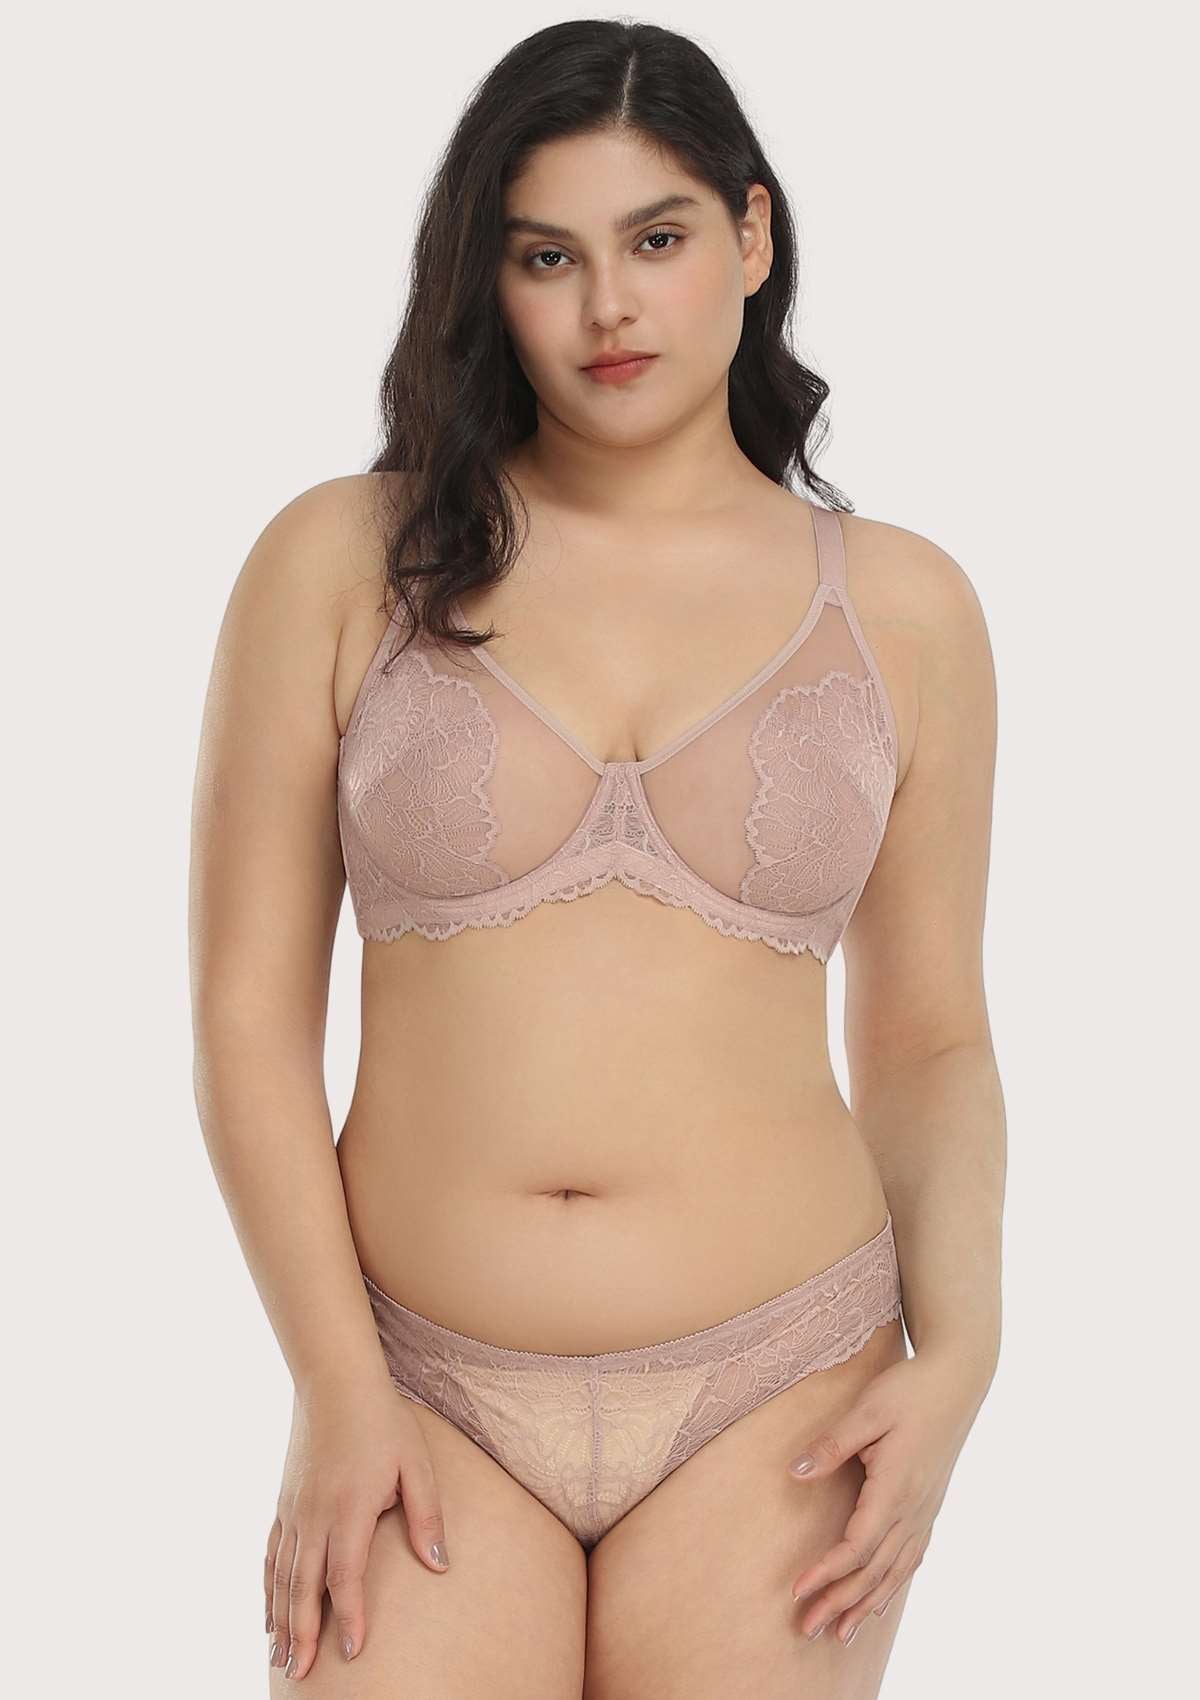 HSIA Blossom Lace Bra And Panties Set: Best Bra For Large Busts - Dark Pink / 40 / DDD/F